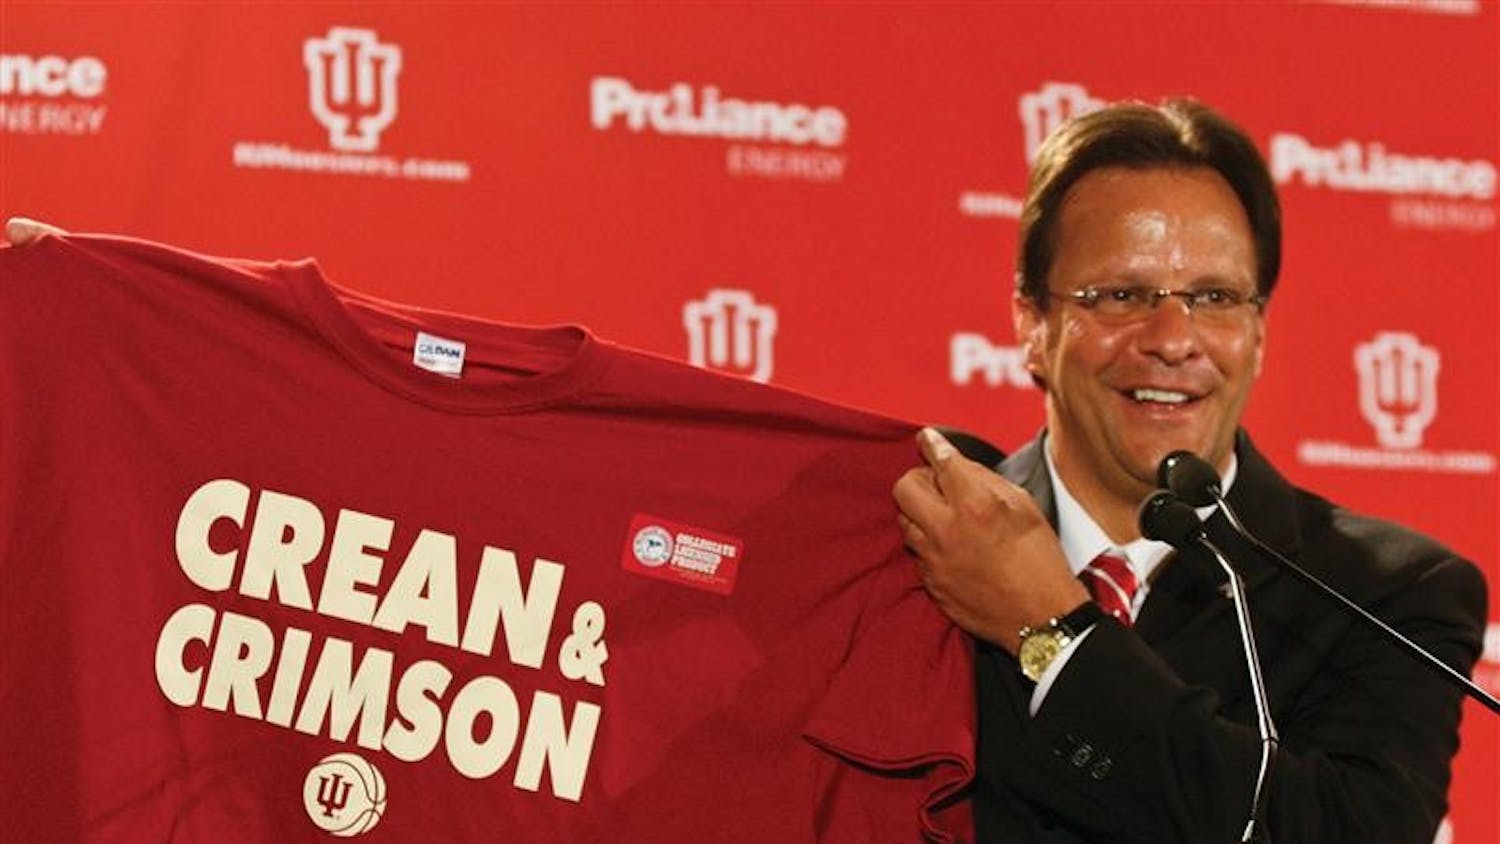 New IU head coach Tom Crean holds a T-shirt that says "Crean & Crimson" during a press conference on April 2, 2008 in the Hoosier Room at Memorial Stadium. Crean was hired after a two week search.